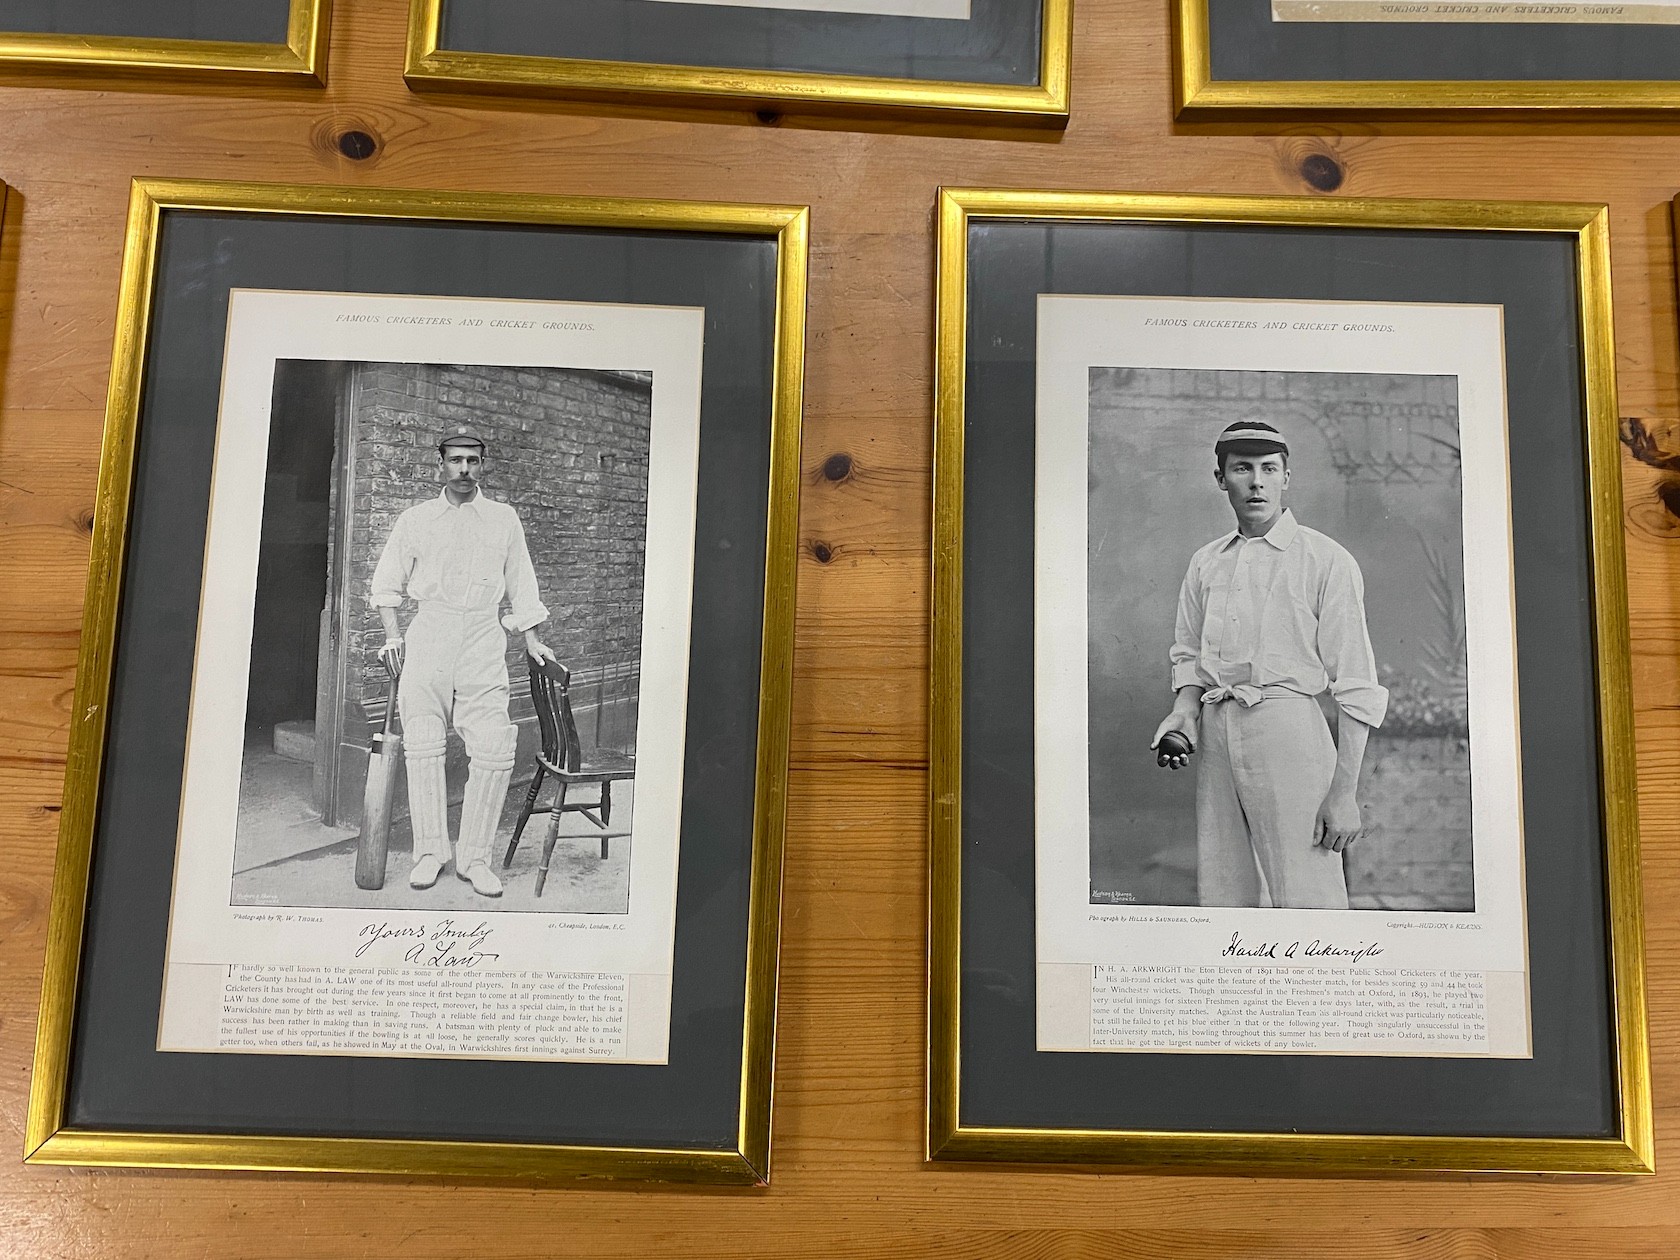 Famous Cricketers and Cricket Grounds ten framed monochrome photographic prints 22cms x 34cms and a Freddie Flintoff signed photograph.